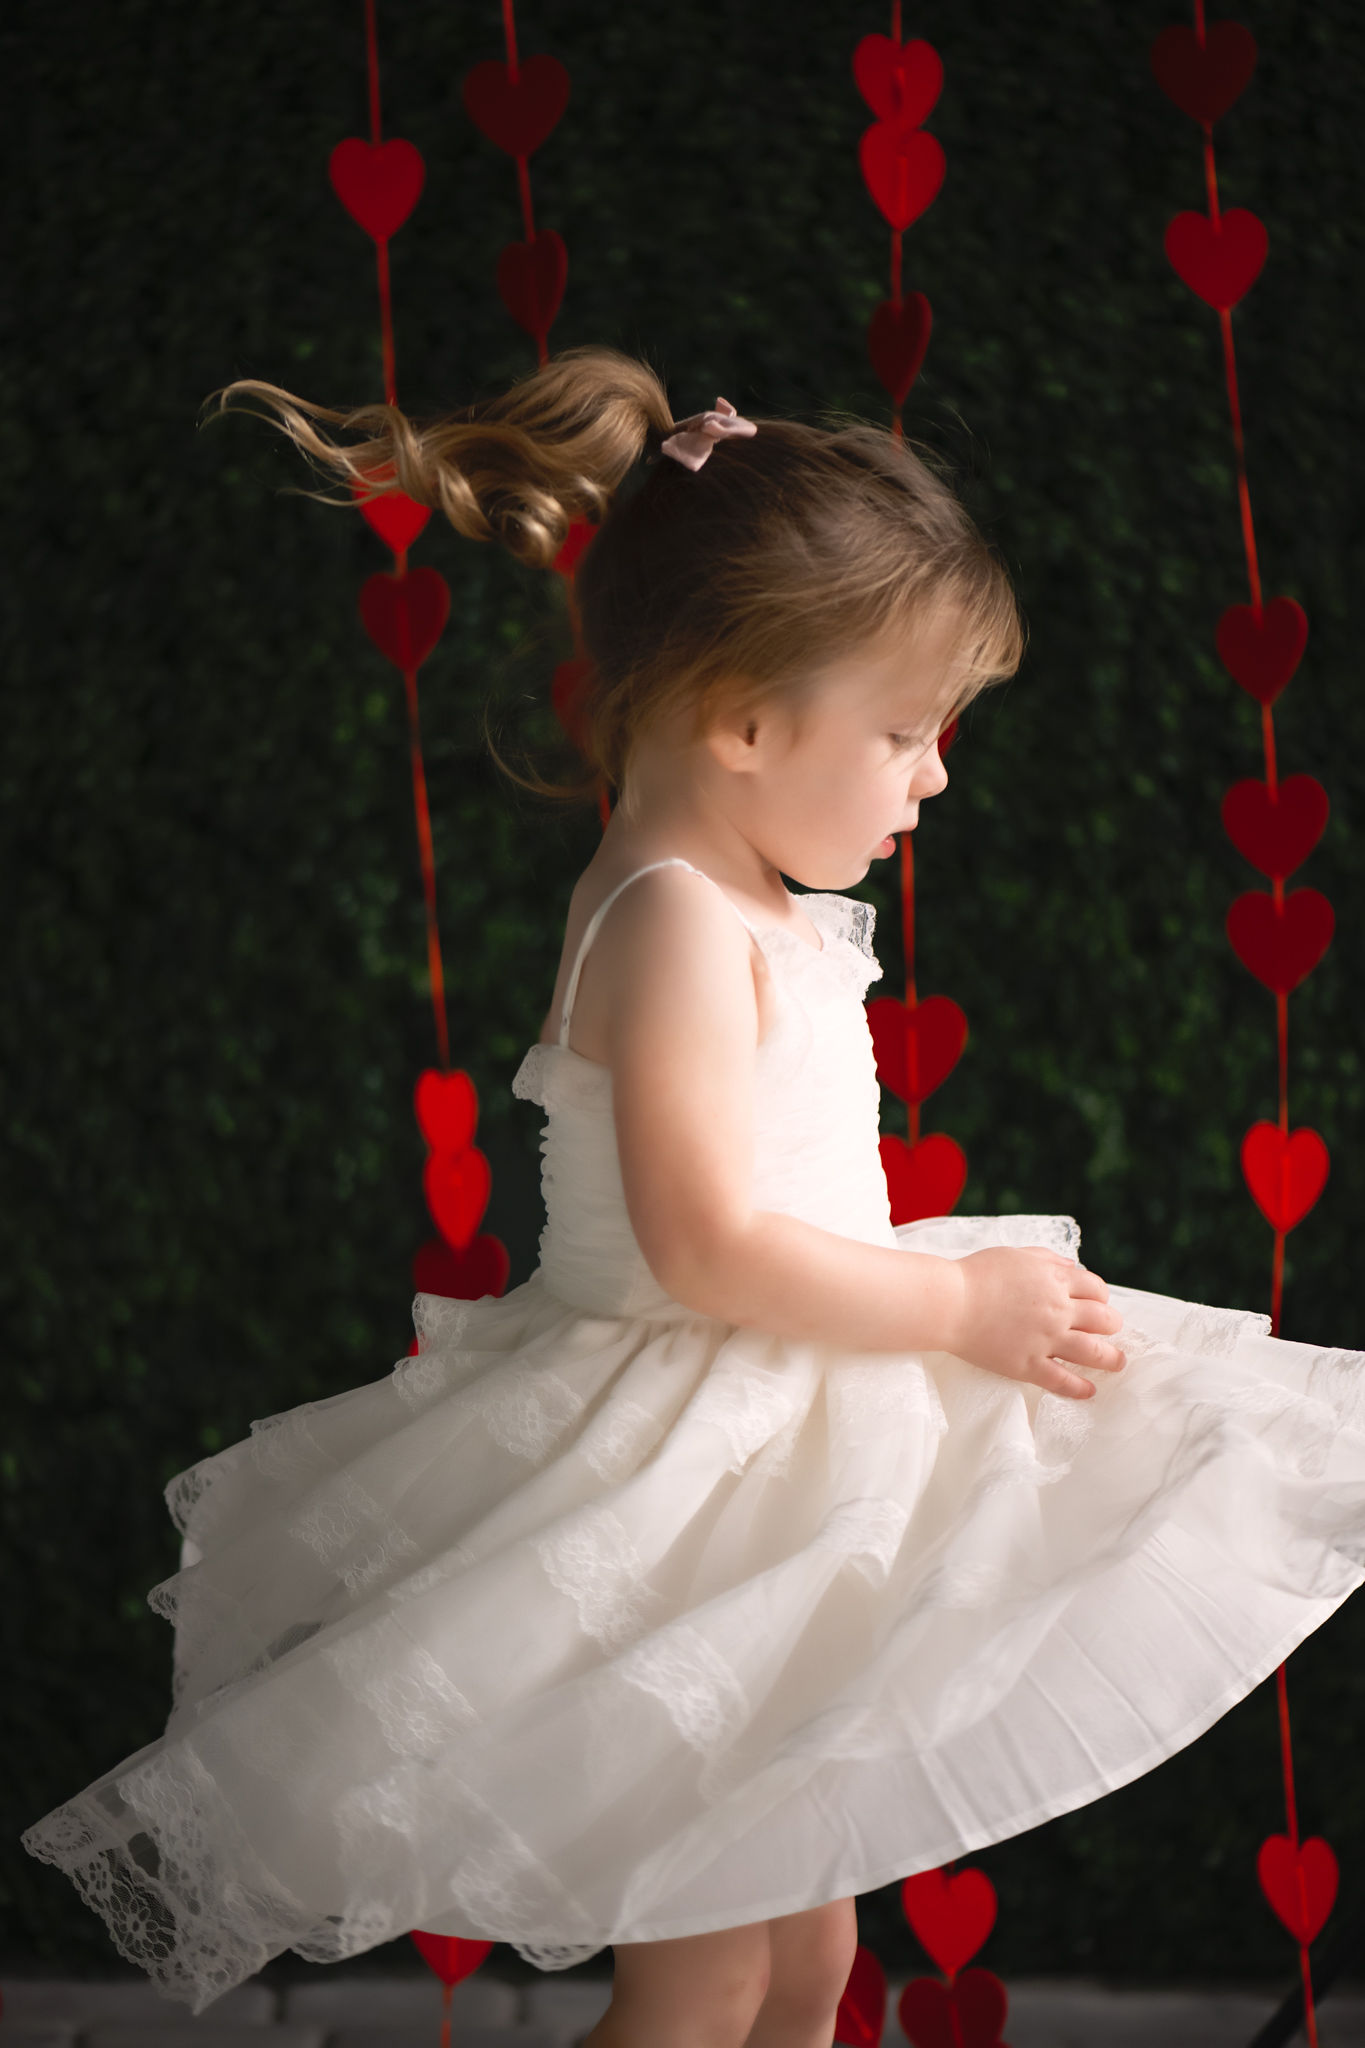 A young girl in a white lace dress plays and spins in a studio with red hearts hanging behind her tampa toy stores